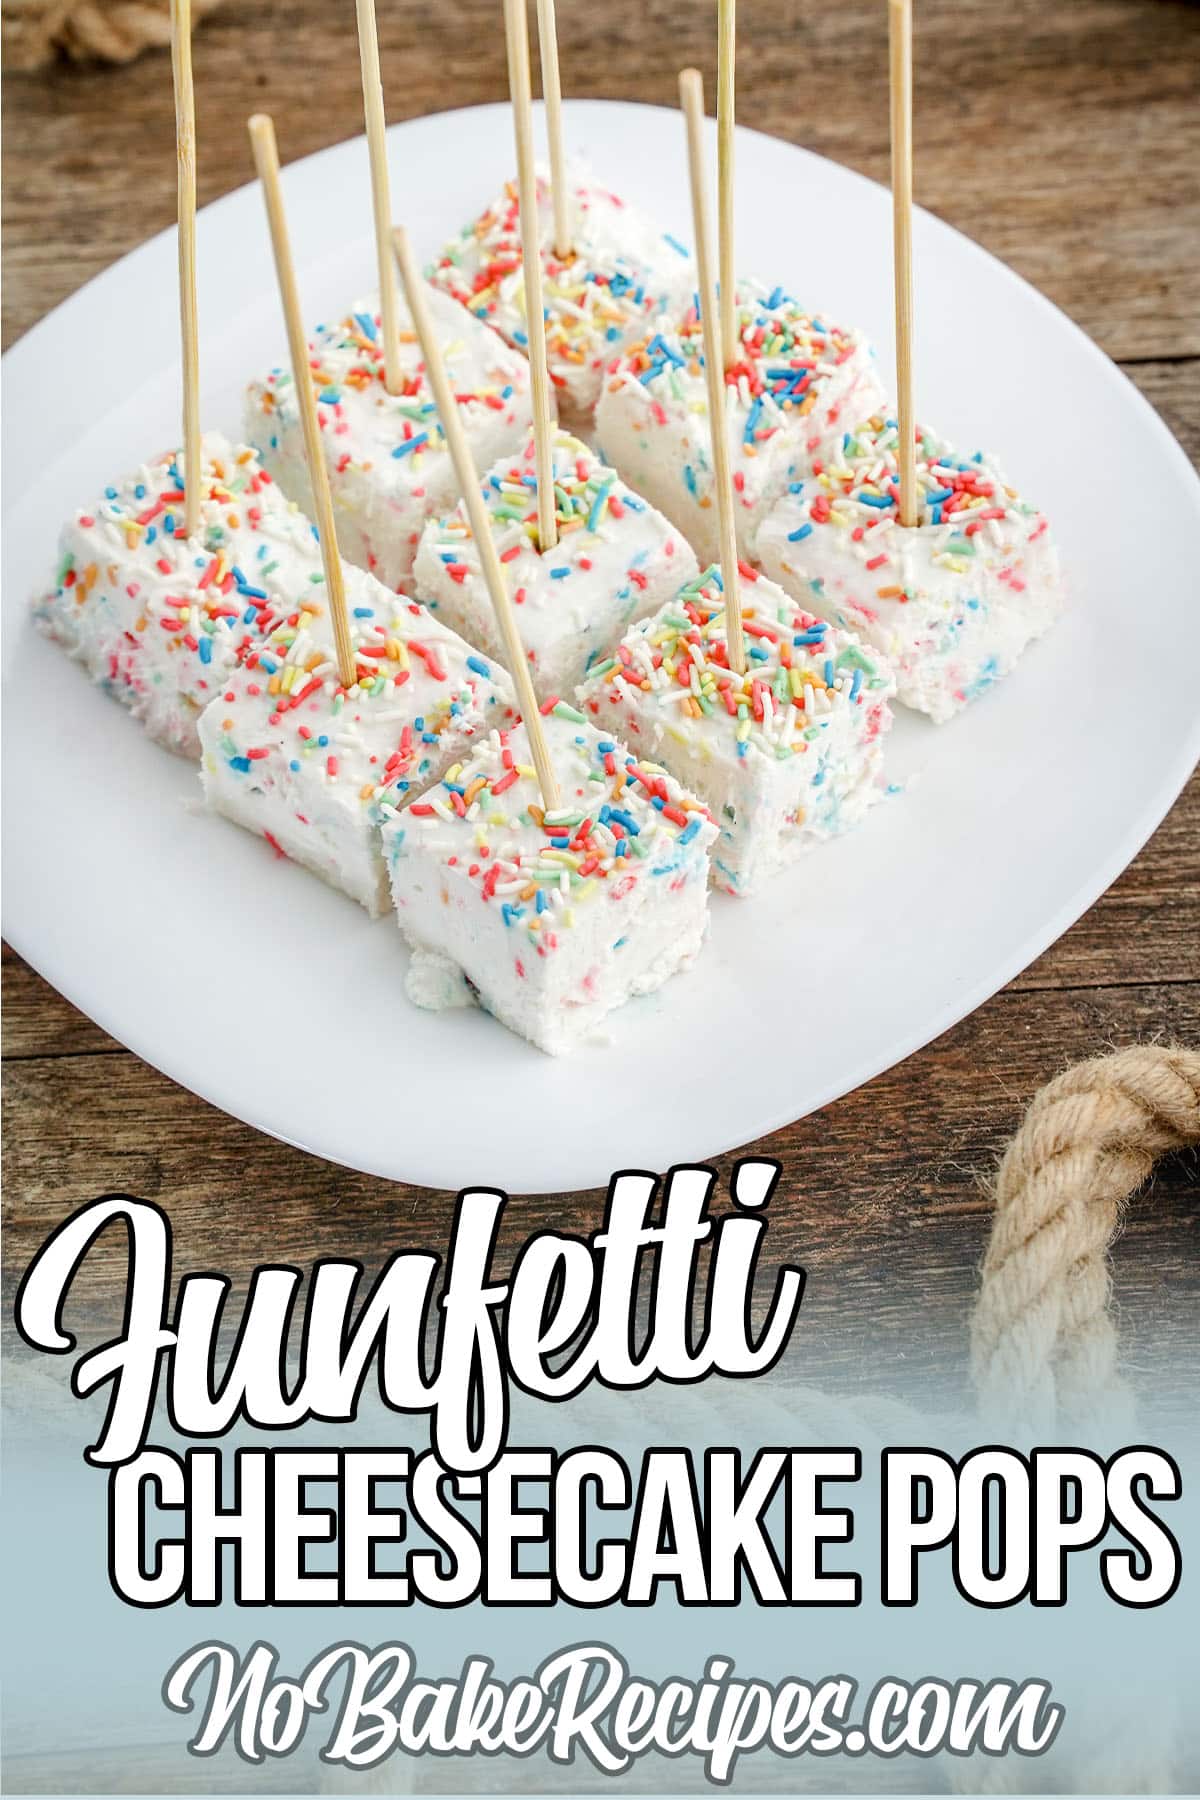 birthday cake cheesecake pops with text which reads Funfetti Cheesecake Pops